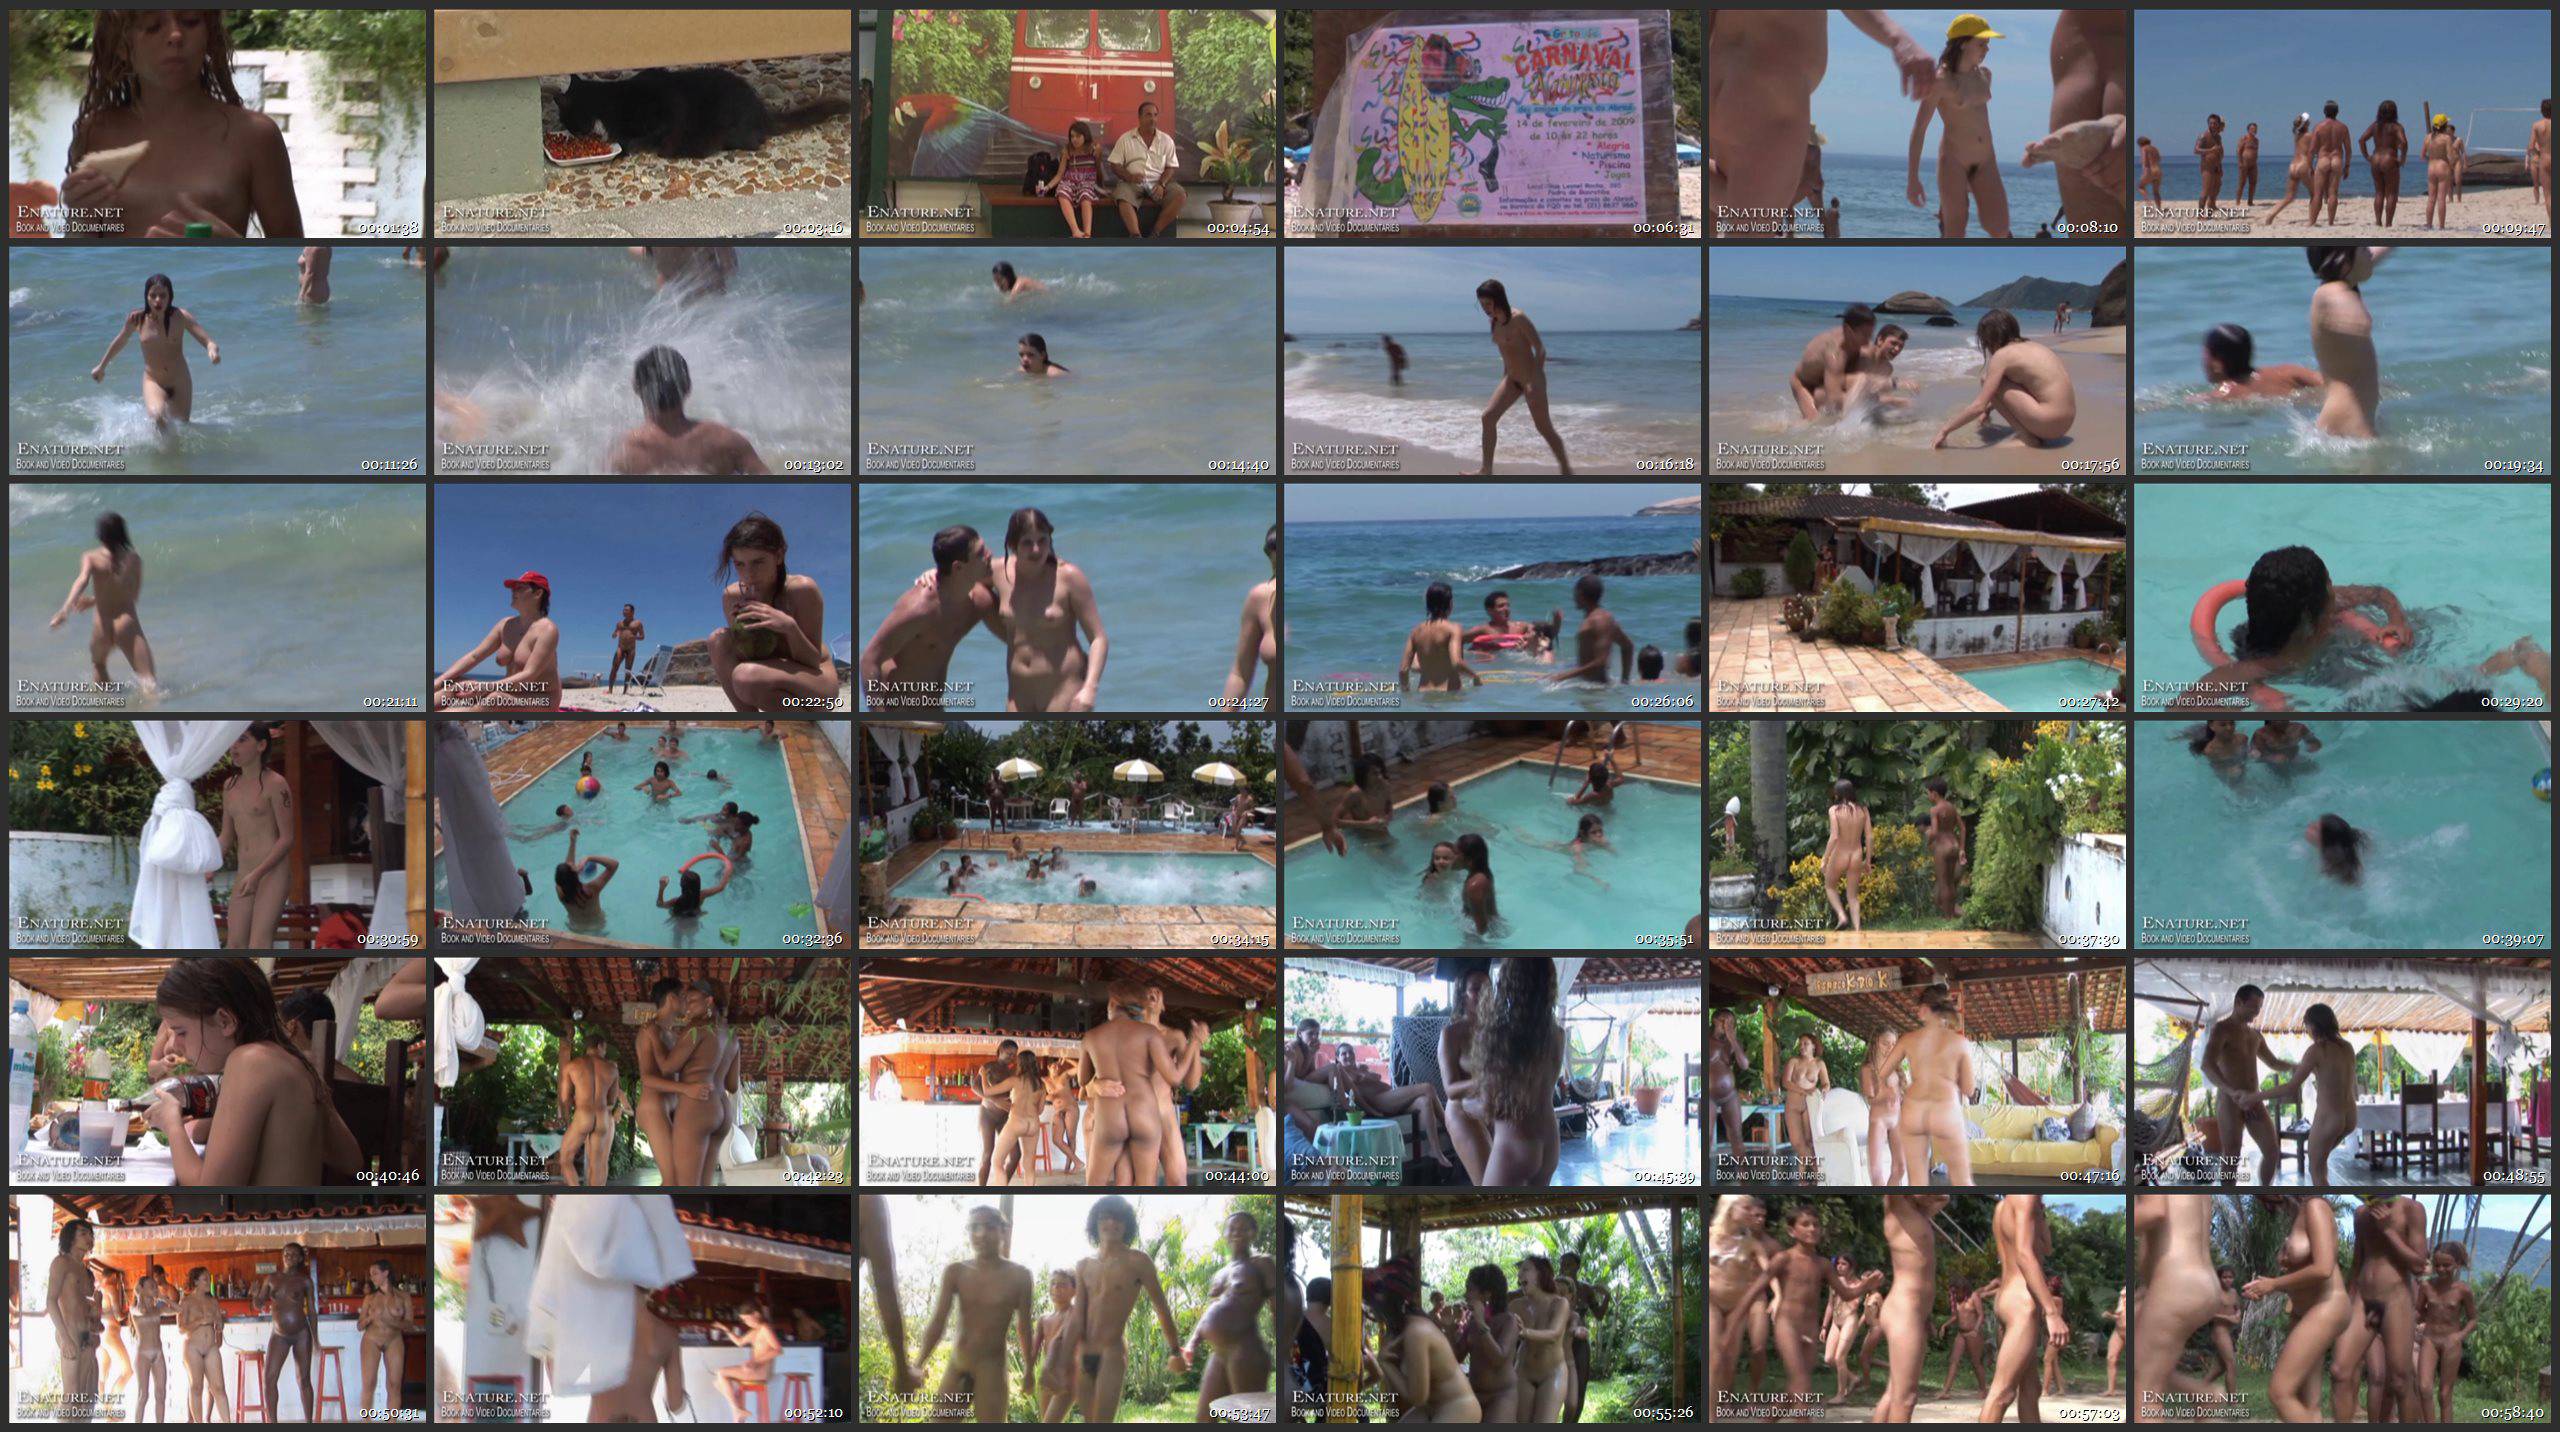 RussianBare and Enature Videos Brazil Naturist Festival Tour. Part One - A New World Without Clothes - Thumbnails